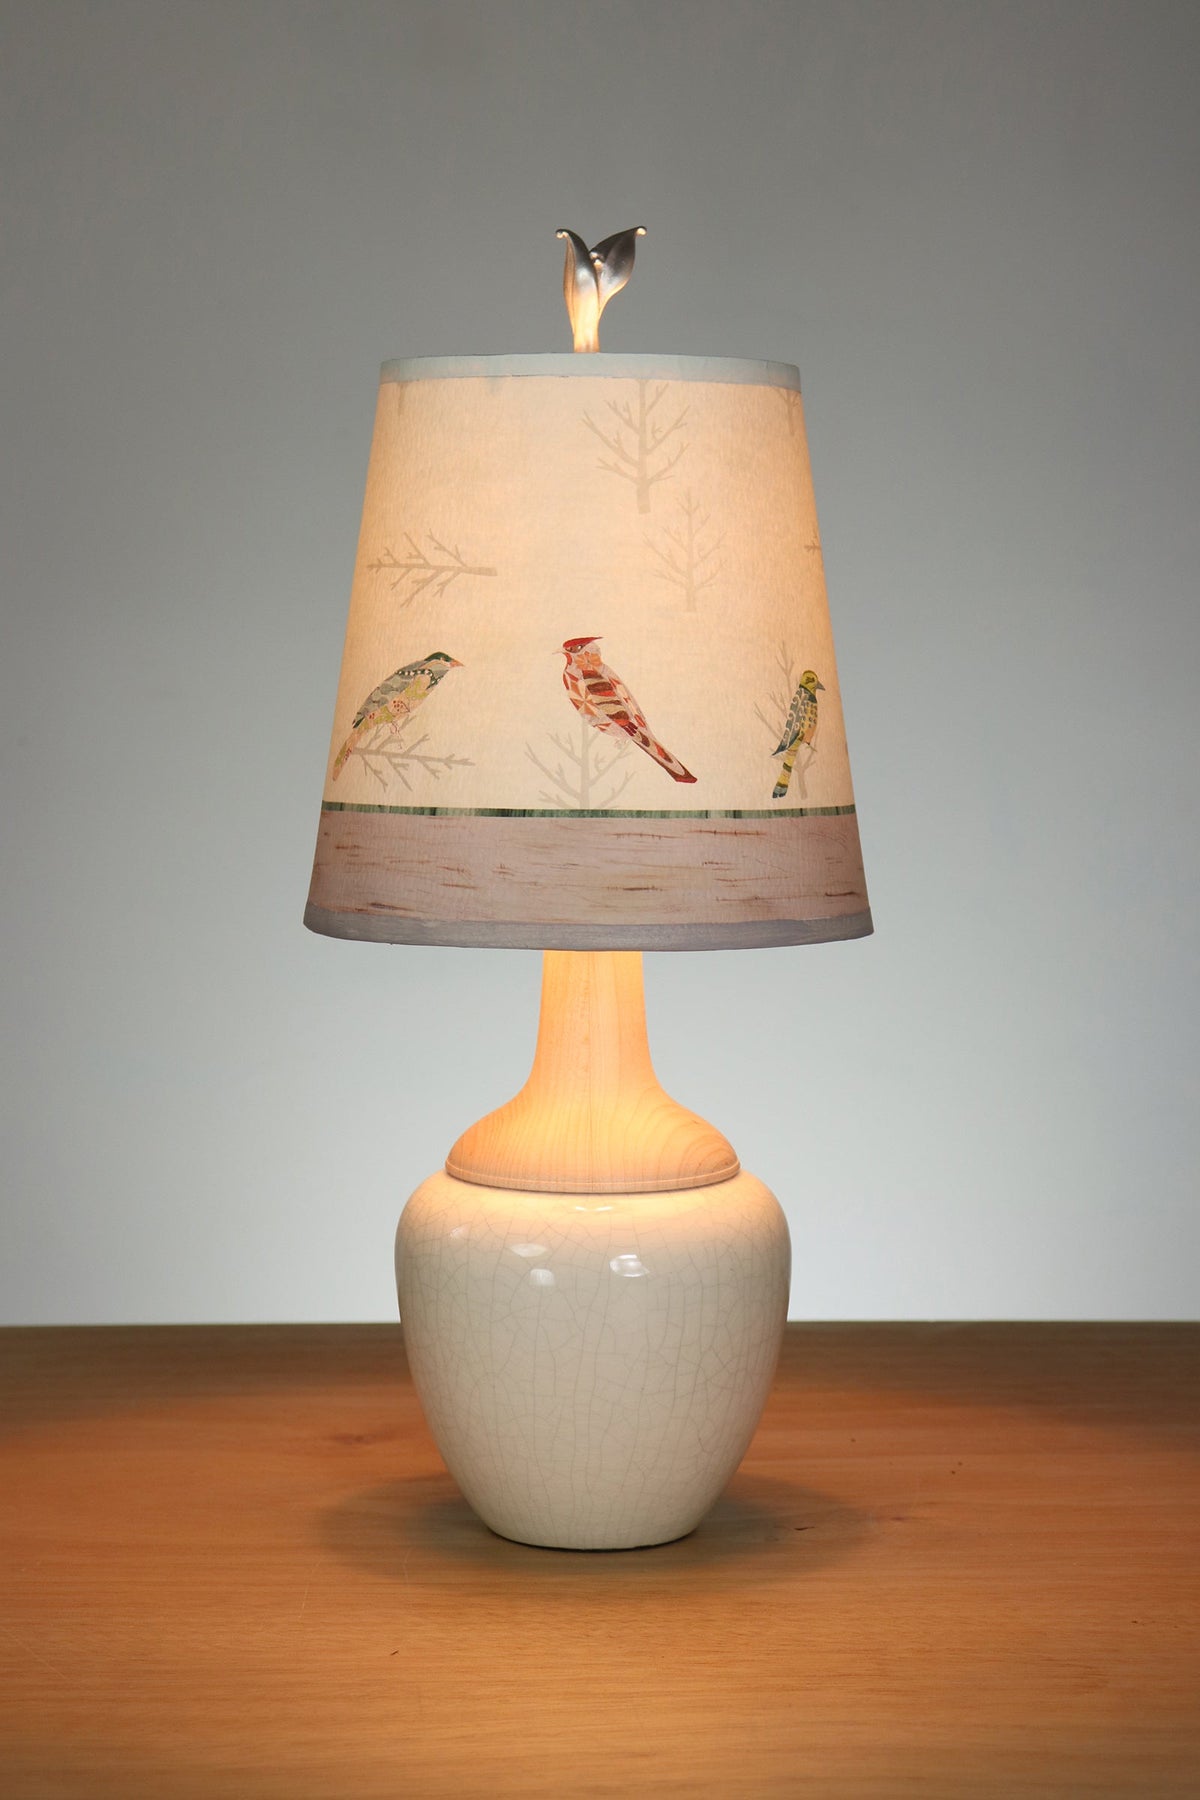 Limited Batch Ceramic Crackle Lamp with Small Drum Shade in Bird Friends